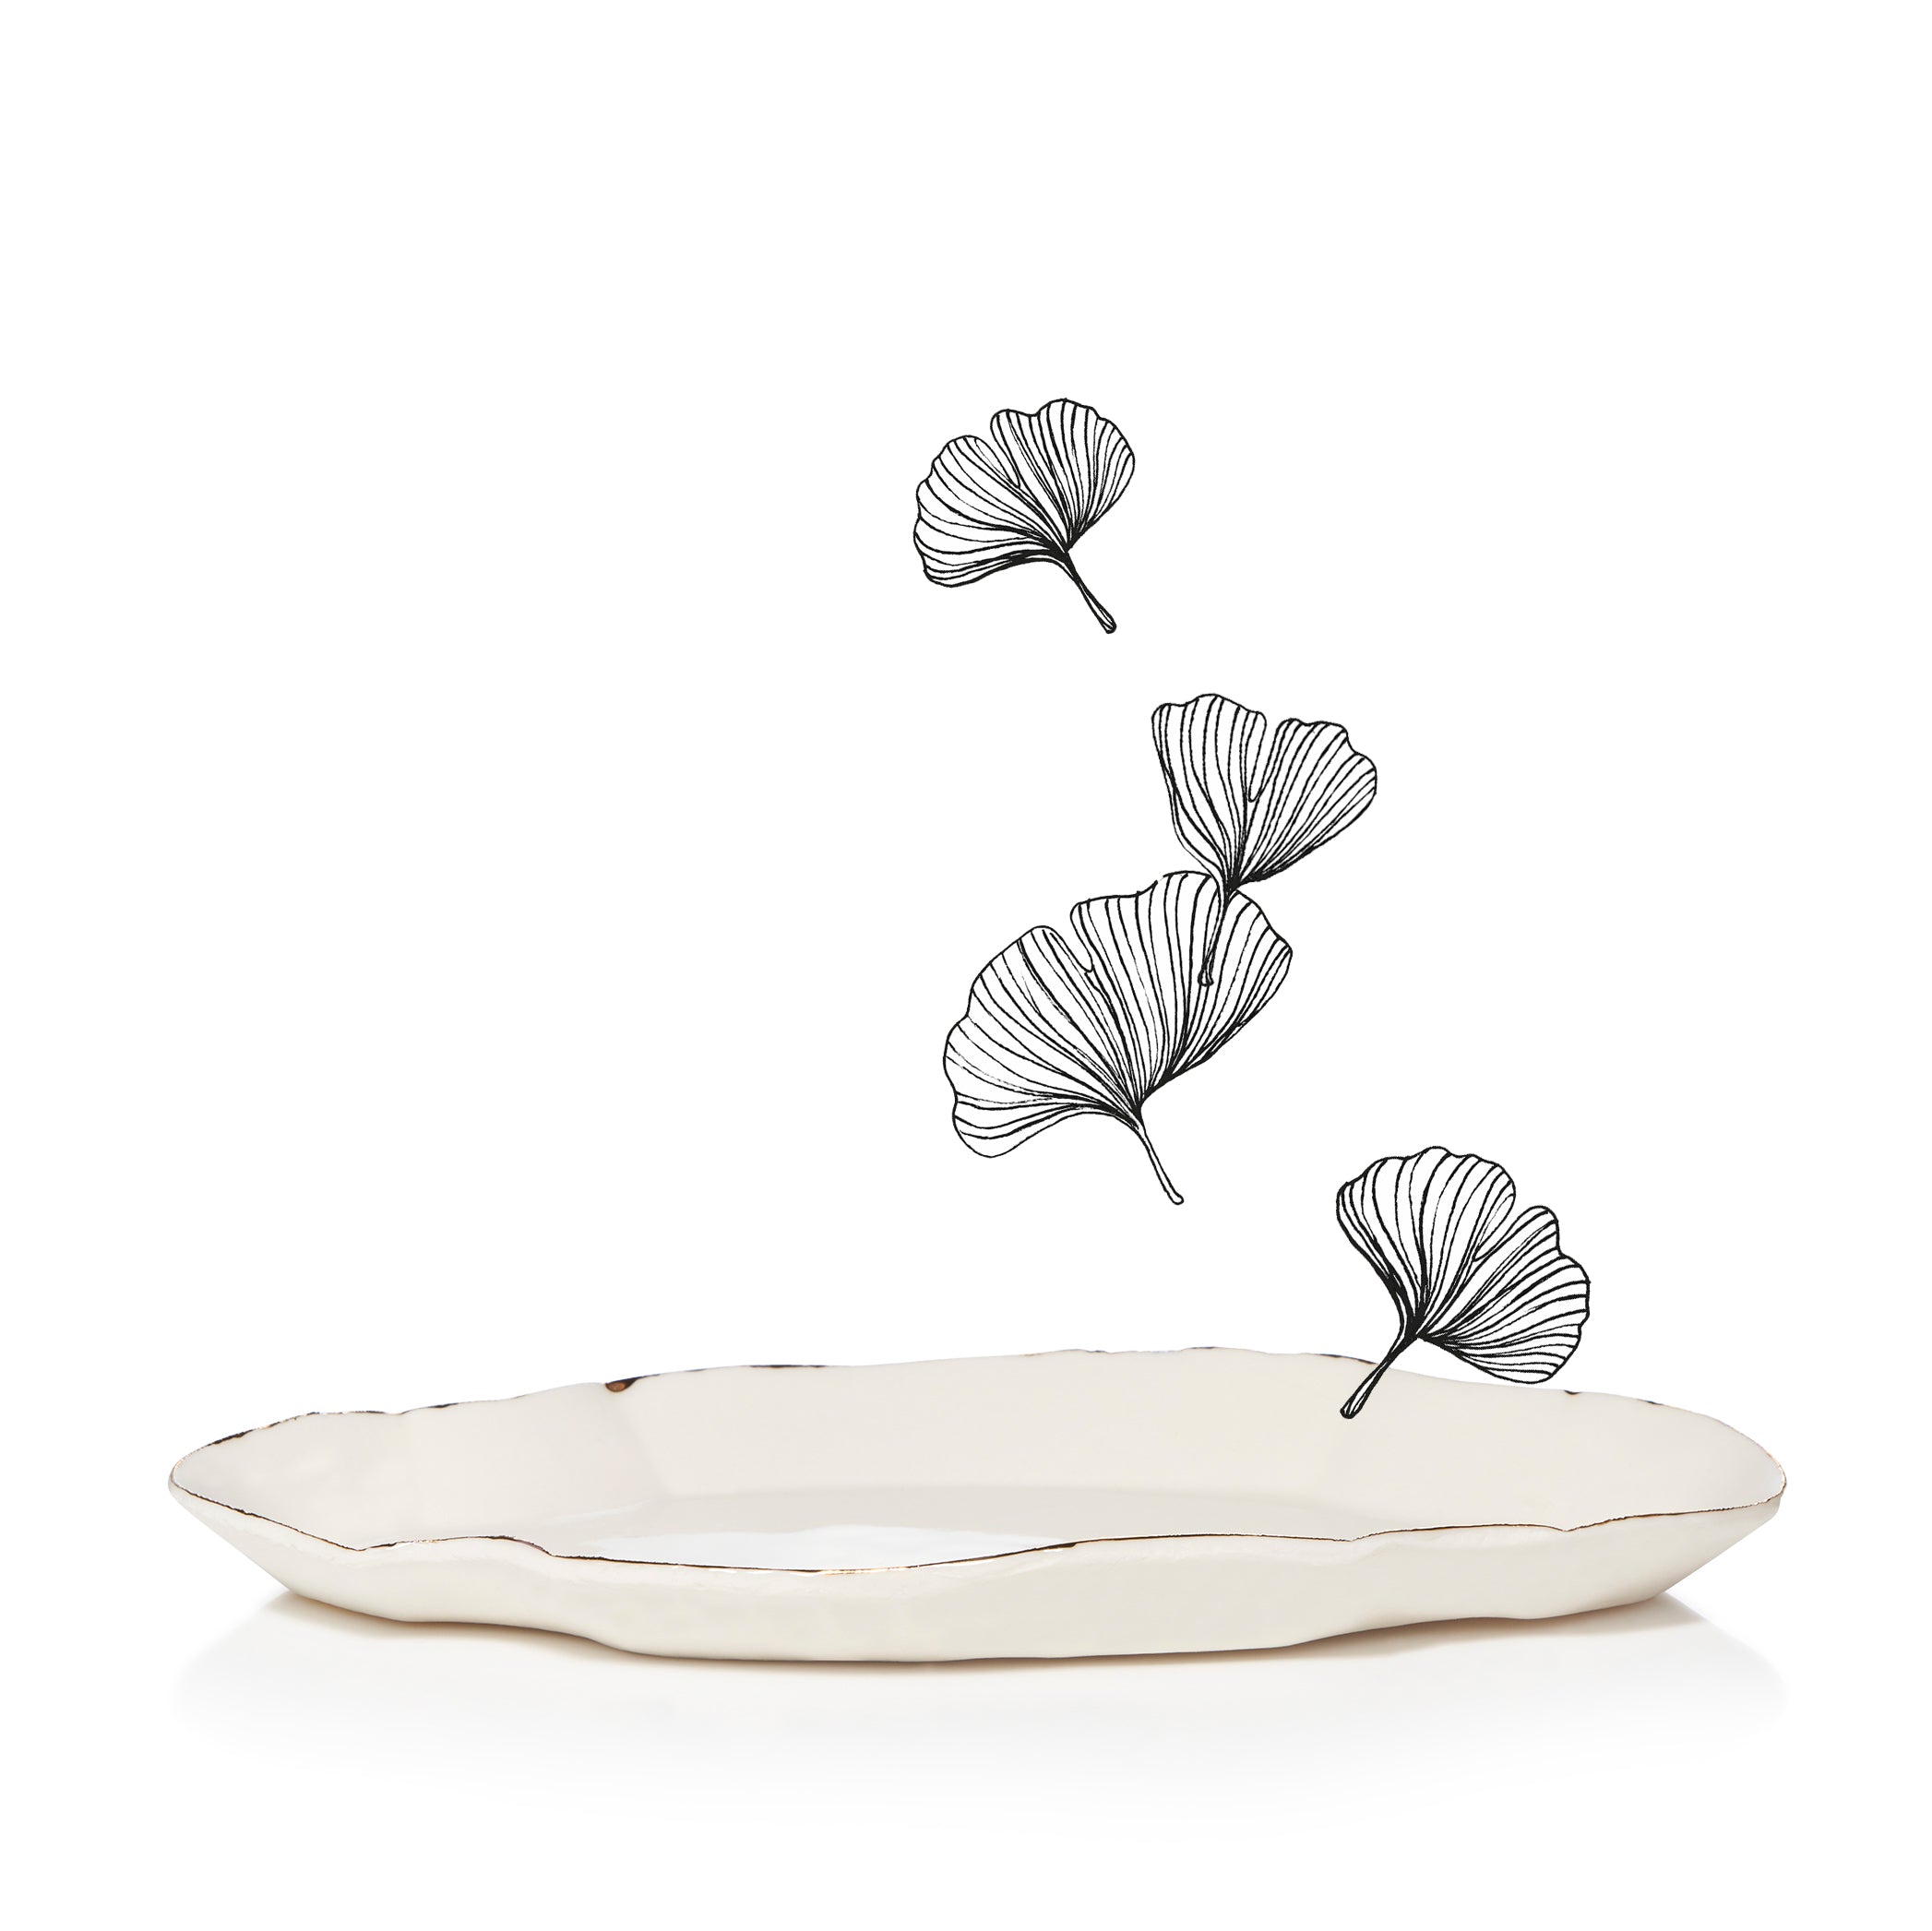 HB Deco Jagged Oval Tray, 23cm